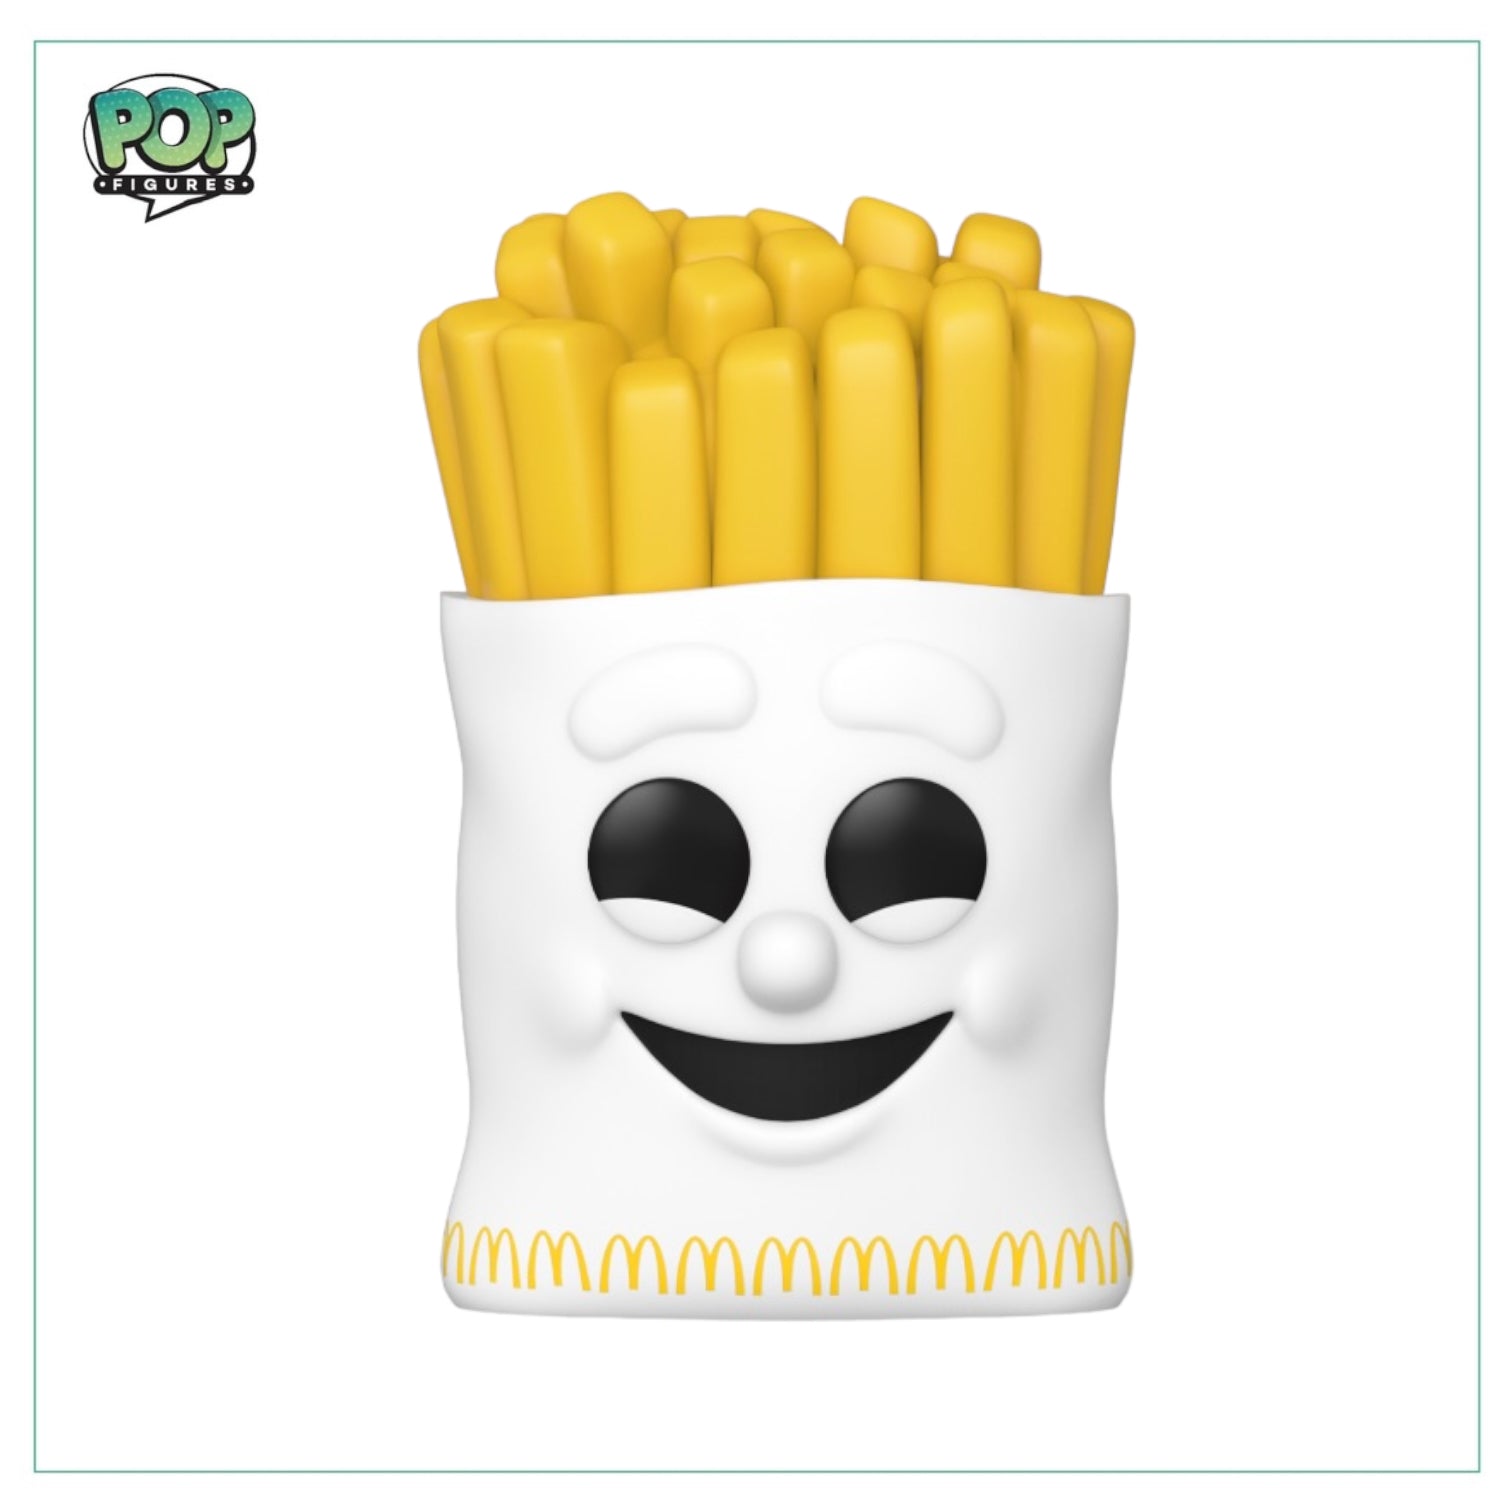 Meal Squad French Fries #149 Funko Pop! - Ad Icons